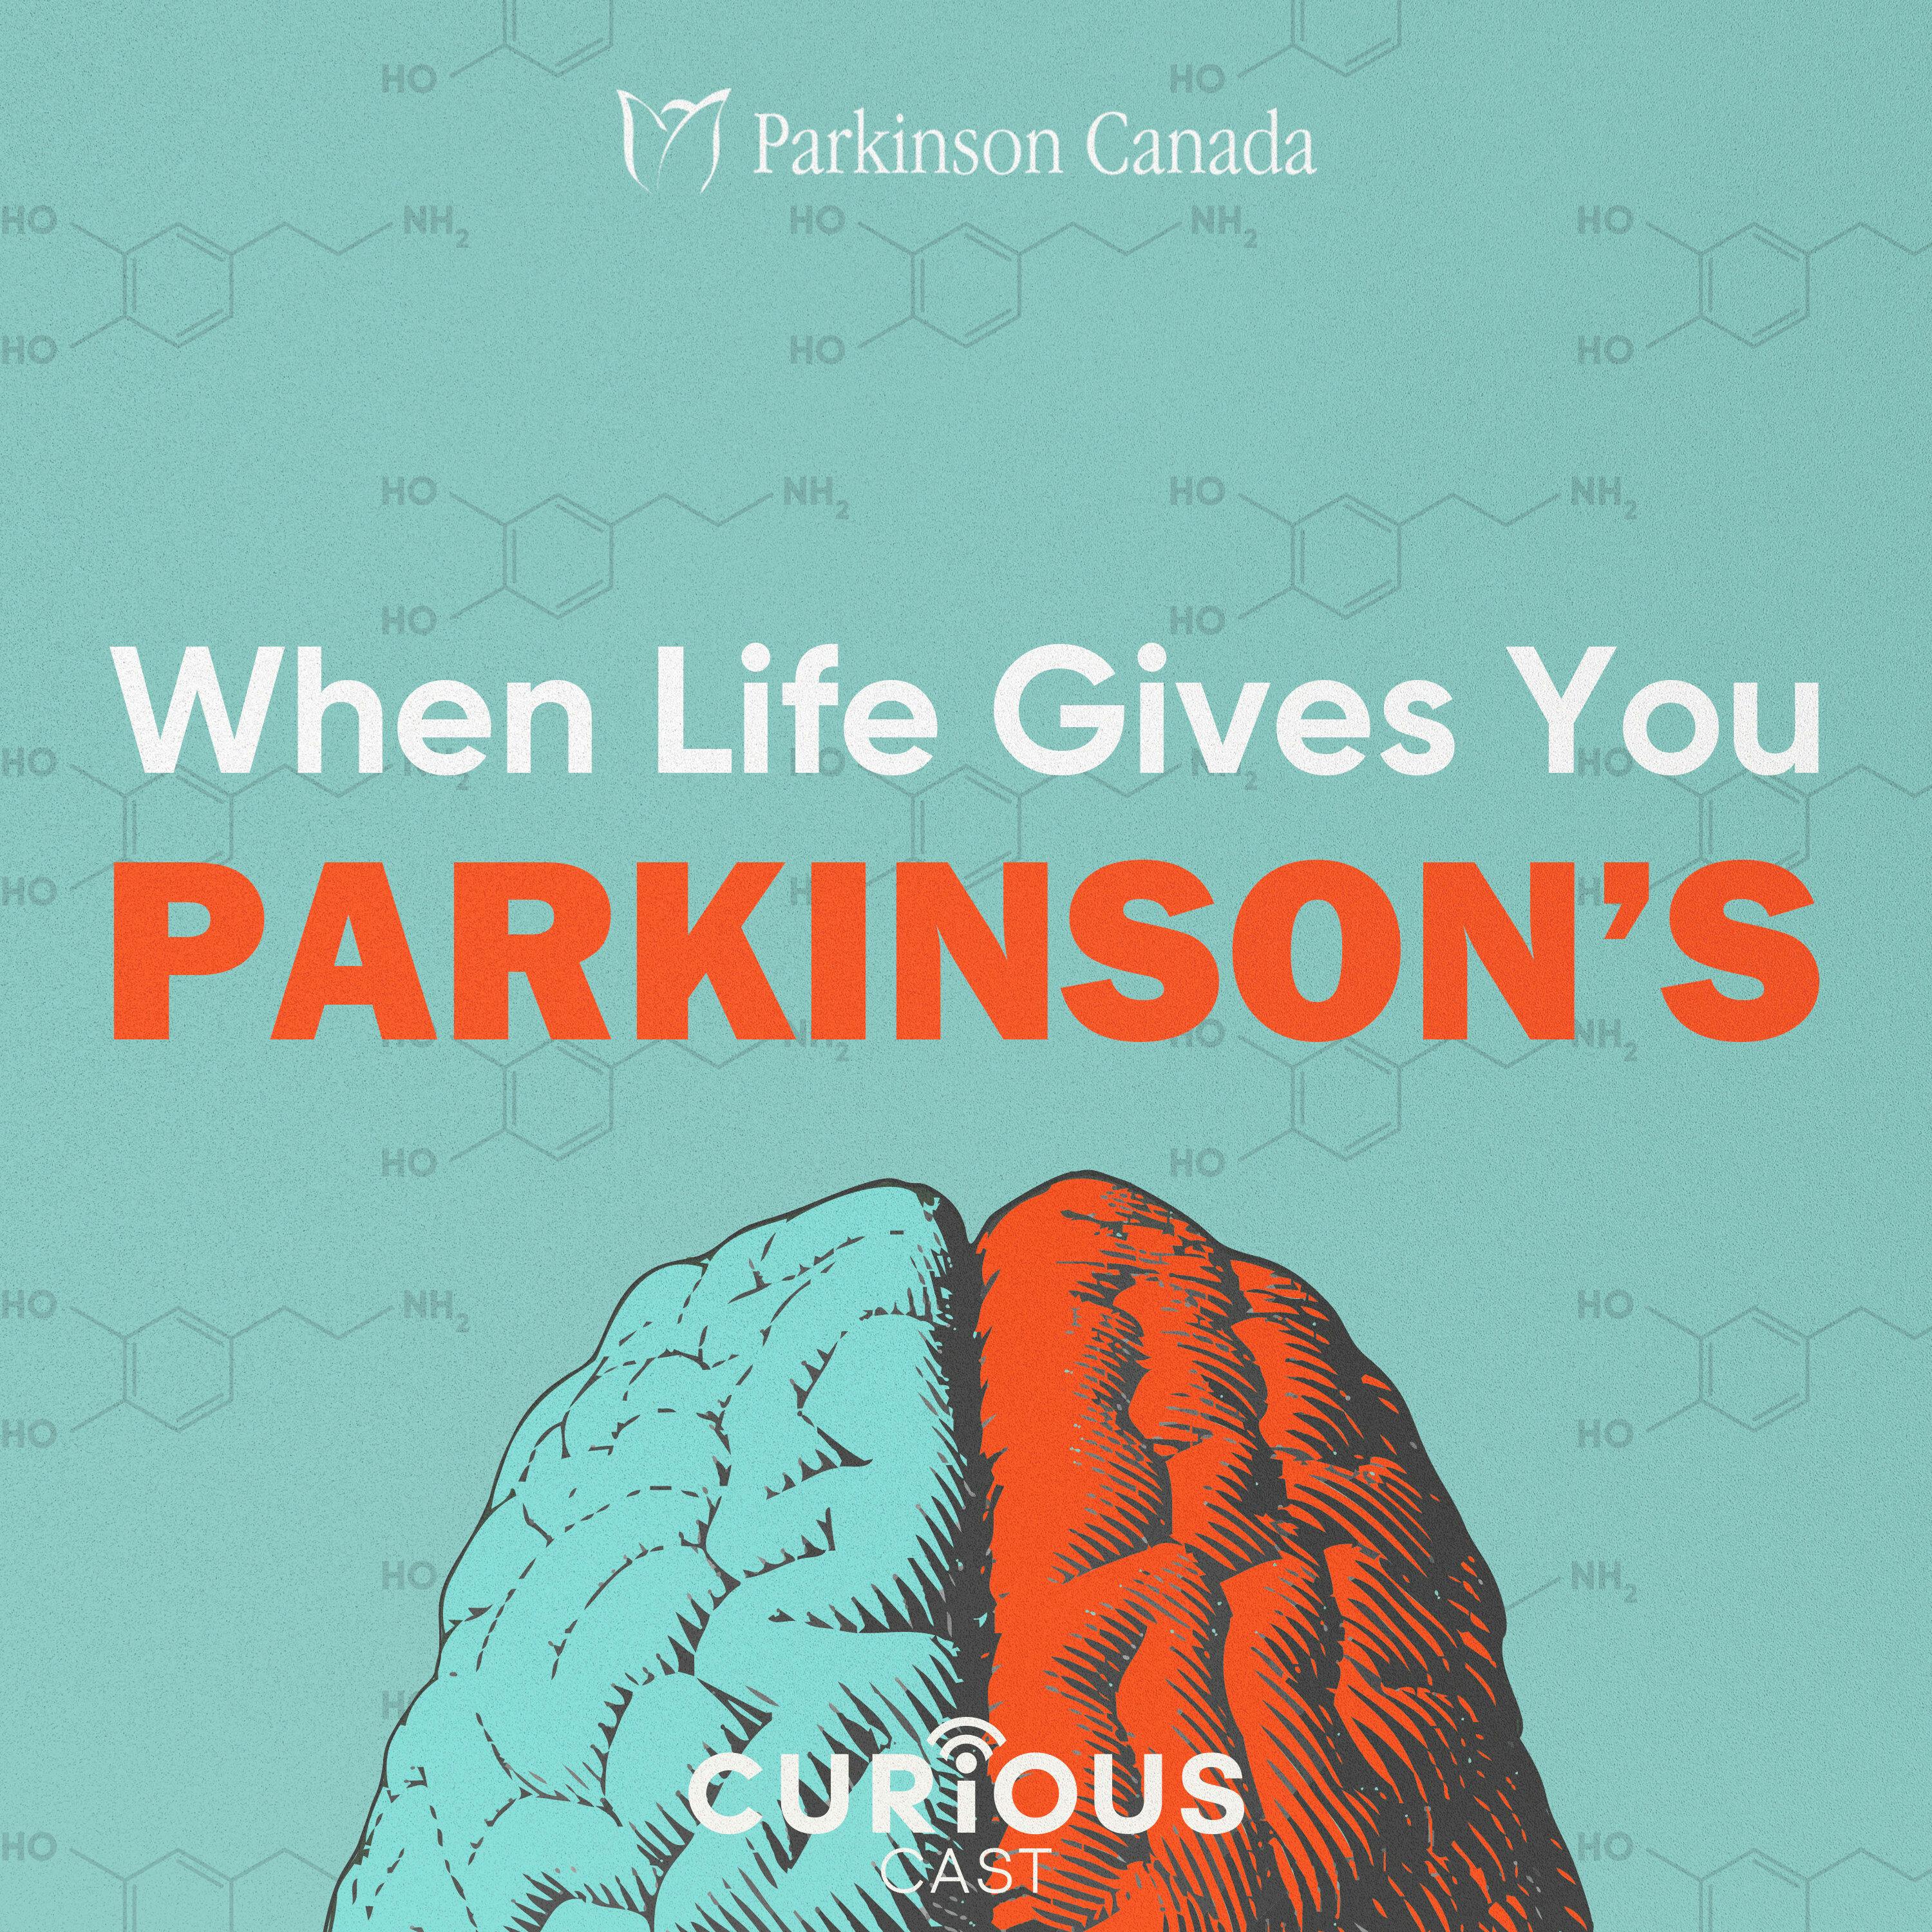 Finding Hope in Parkinson’s | 12